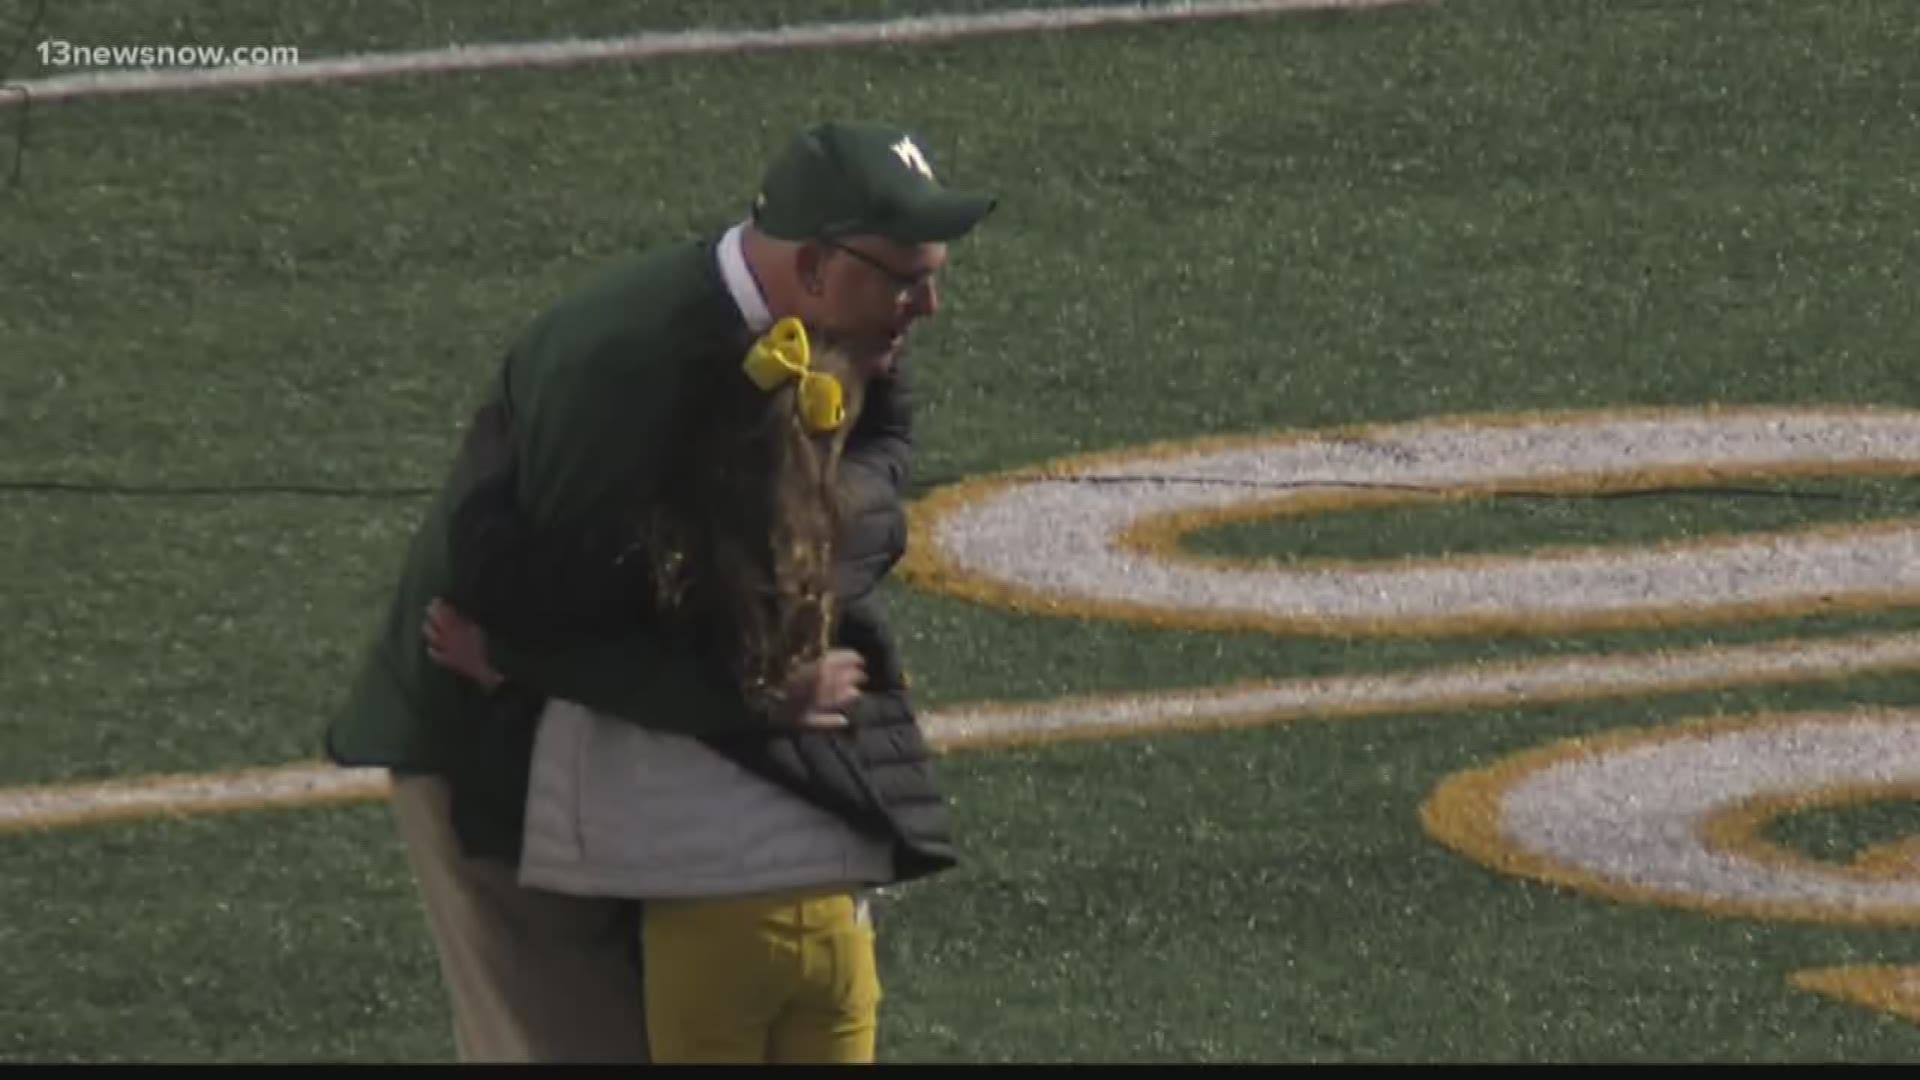 William & Mary turned the ball over three times, and didn't have enough to recover as they lossed to archrival Richmond 10-6. It was the last for legendary head coach, Jimmye Laycock who leaves the school after 39 years.